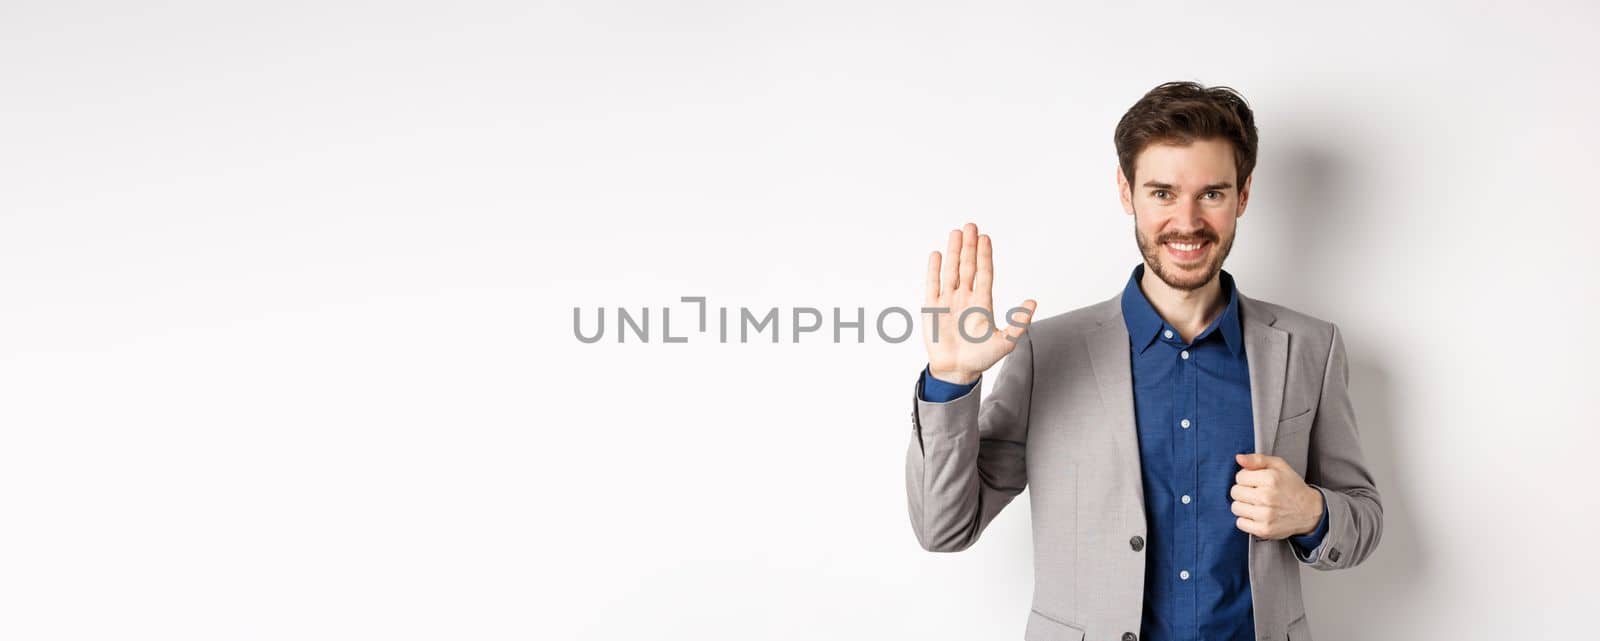 Smiling handsome businessman in suit waving hand, greeting friend with friendly face, say hellp, standing on white background.